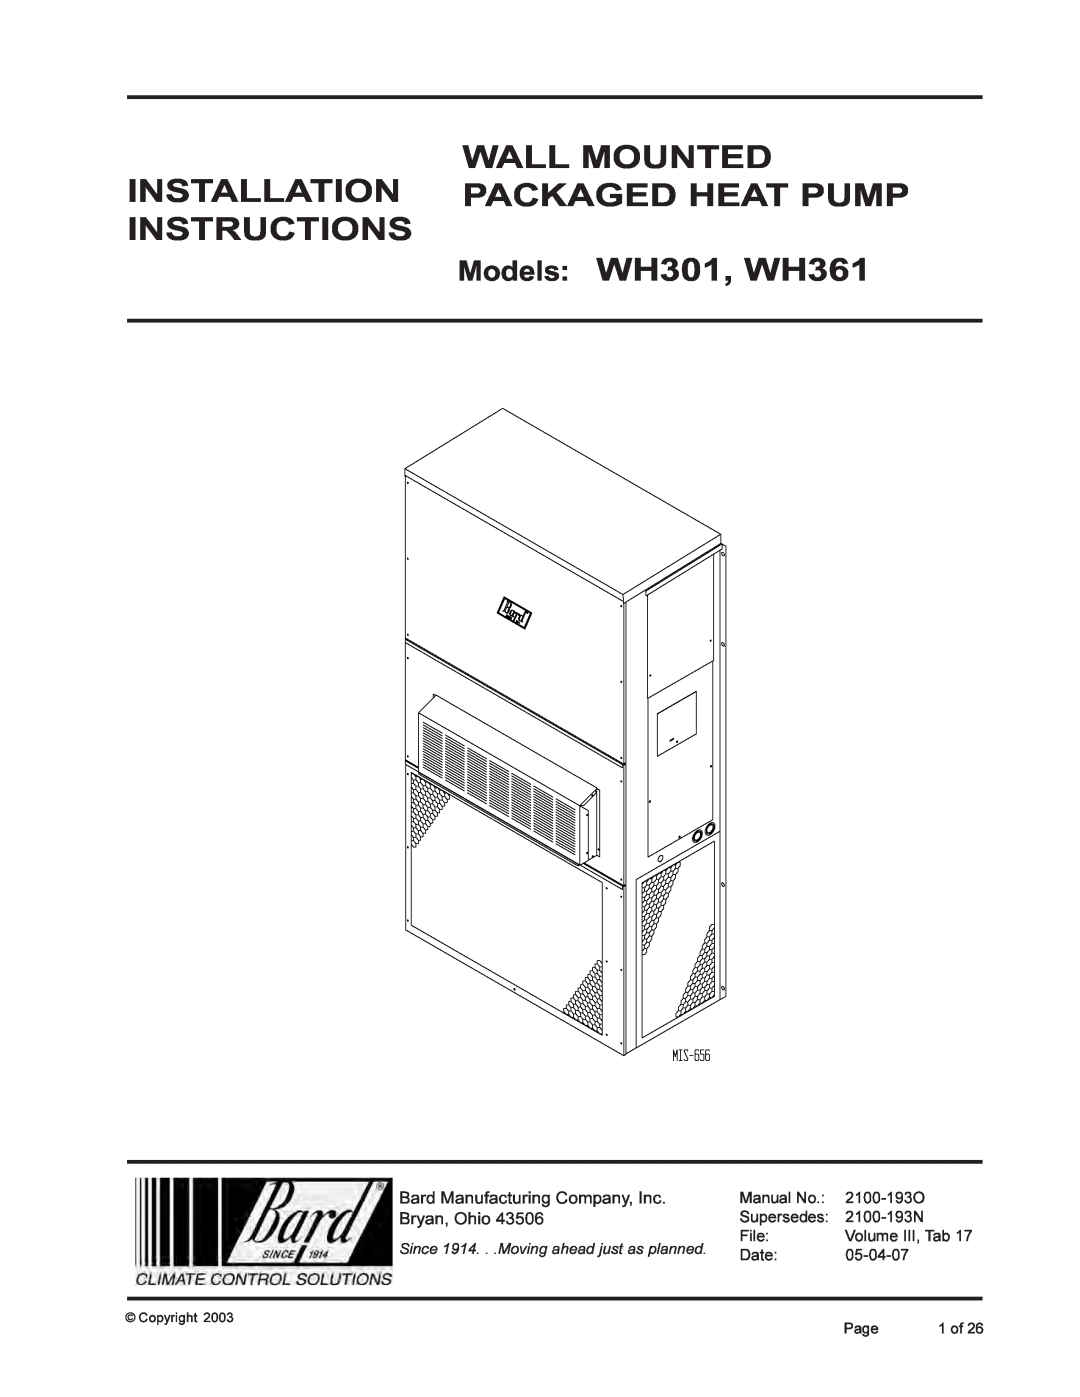 Bard WH-301 installation instructions Wall Mounted, Installation Packaged Heat Pump Instructions, Models WH301, WH361 